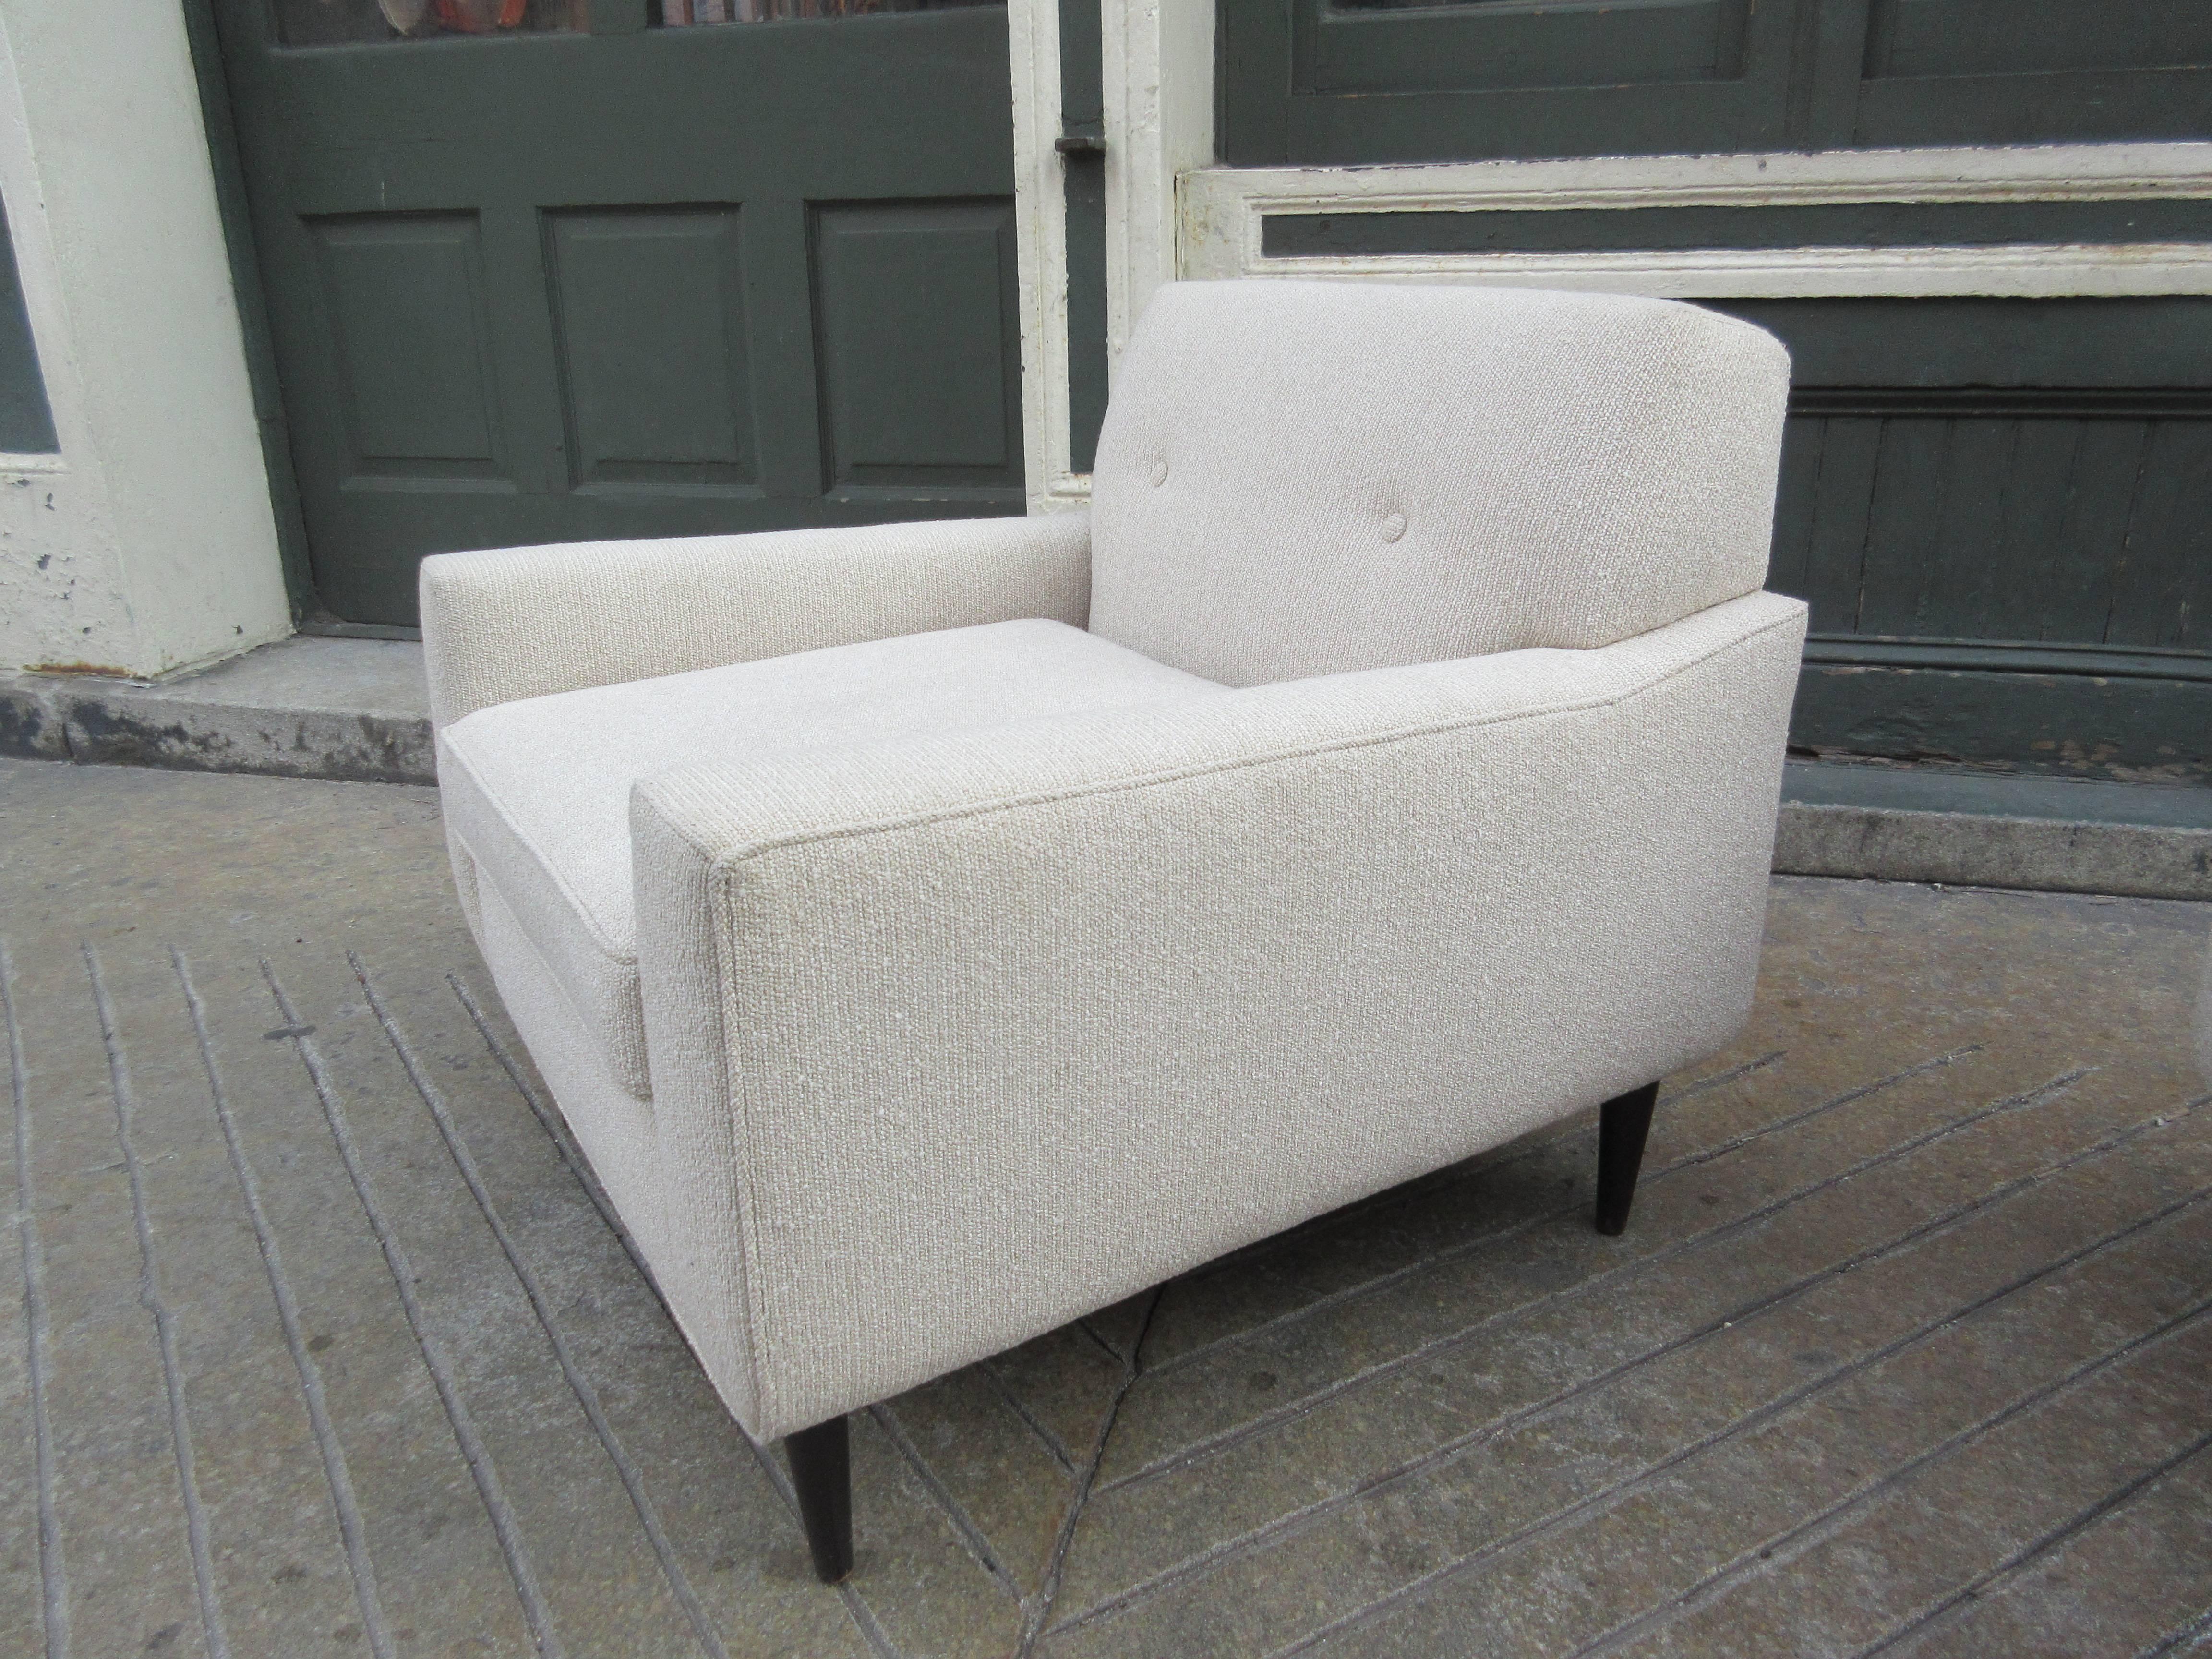 Newly upholstered pair of lounge chairs. Nice side profile gives these a unique look! Walnut legs with a nubby cream or oatmeal fabric.